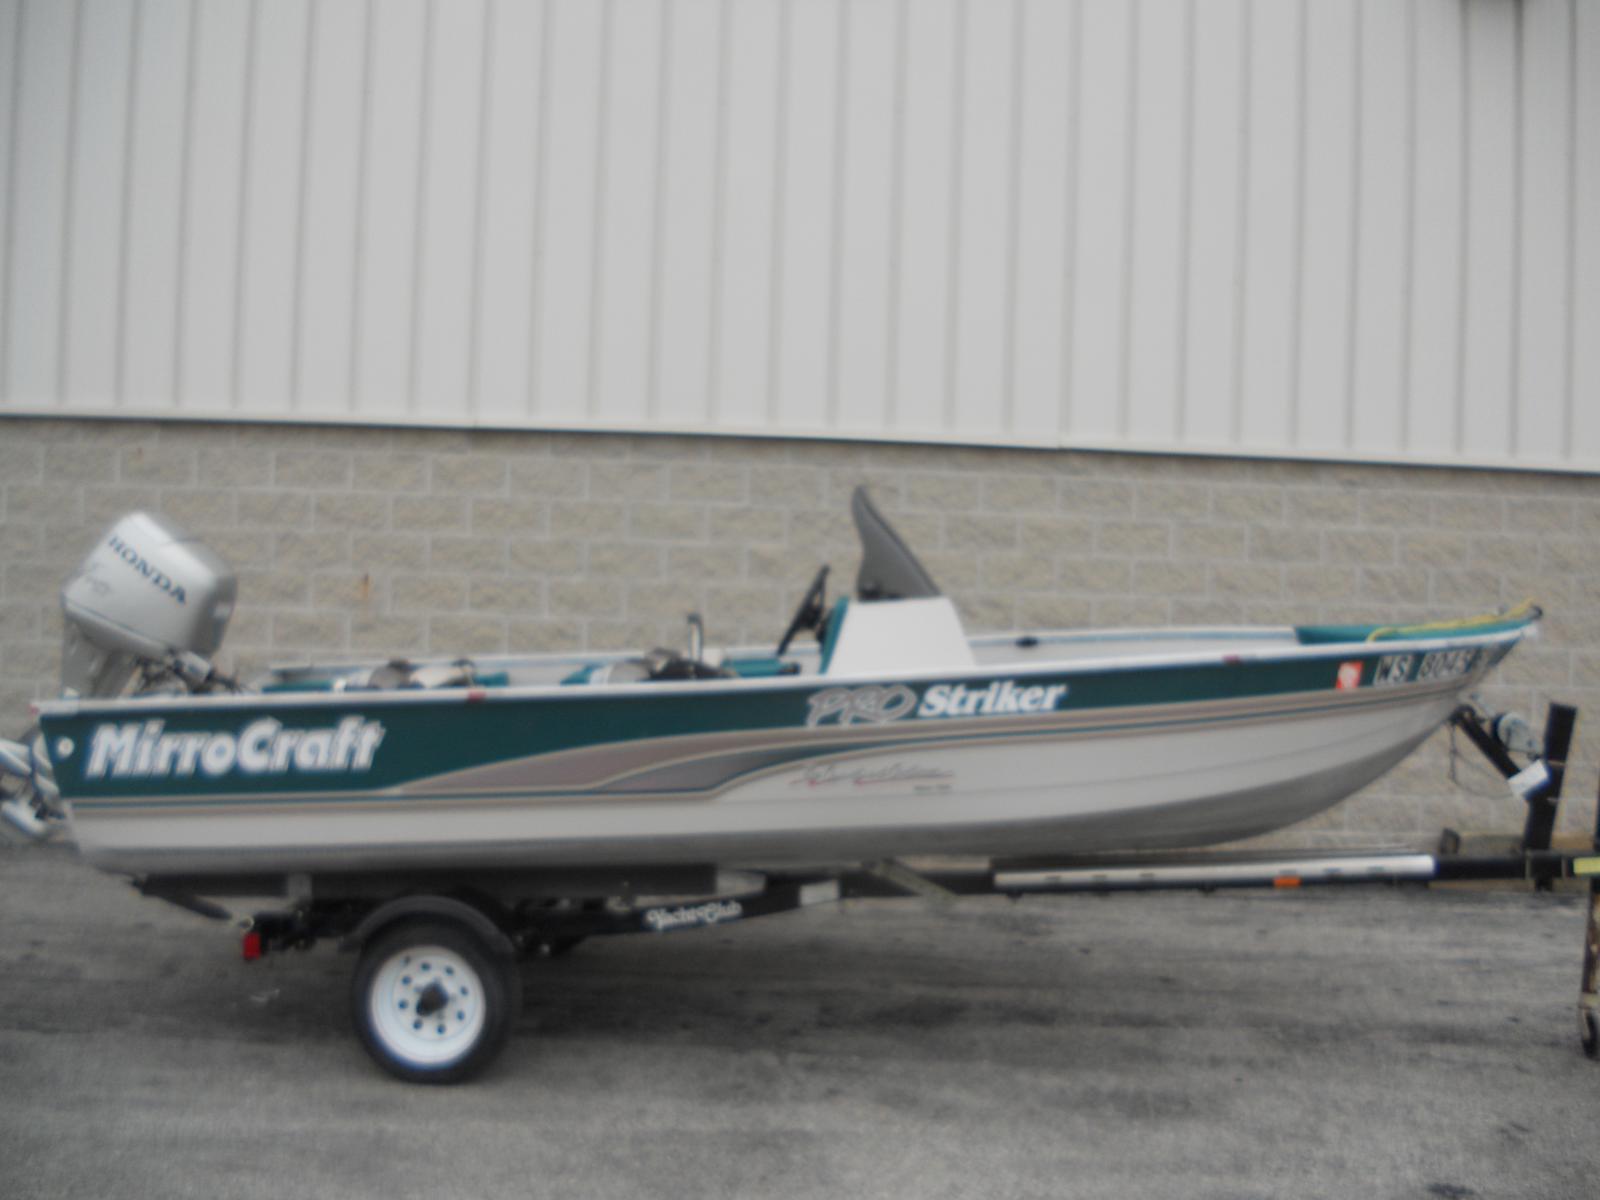 Used Mirrocraft boats for sale - boats.com